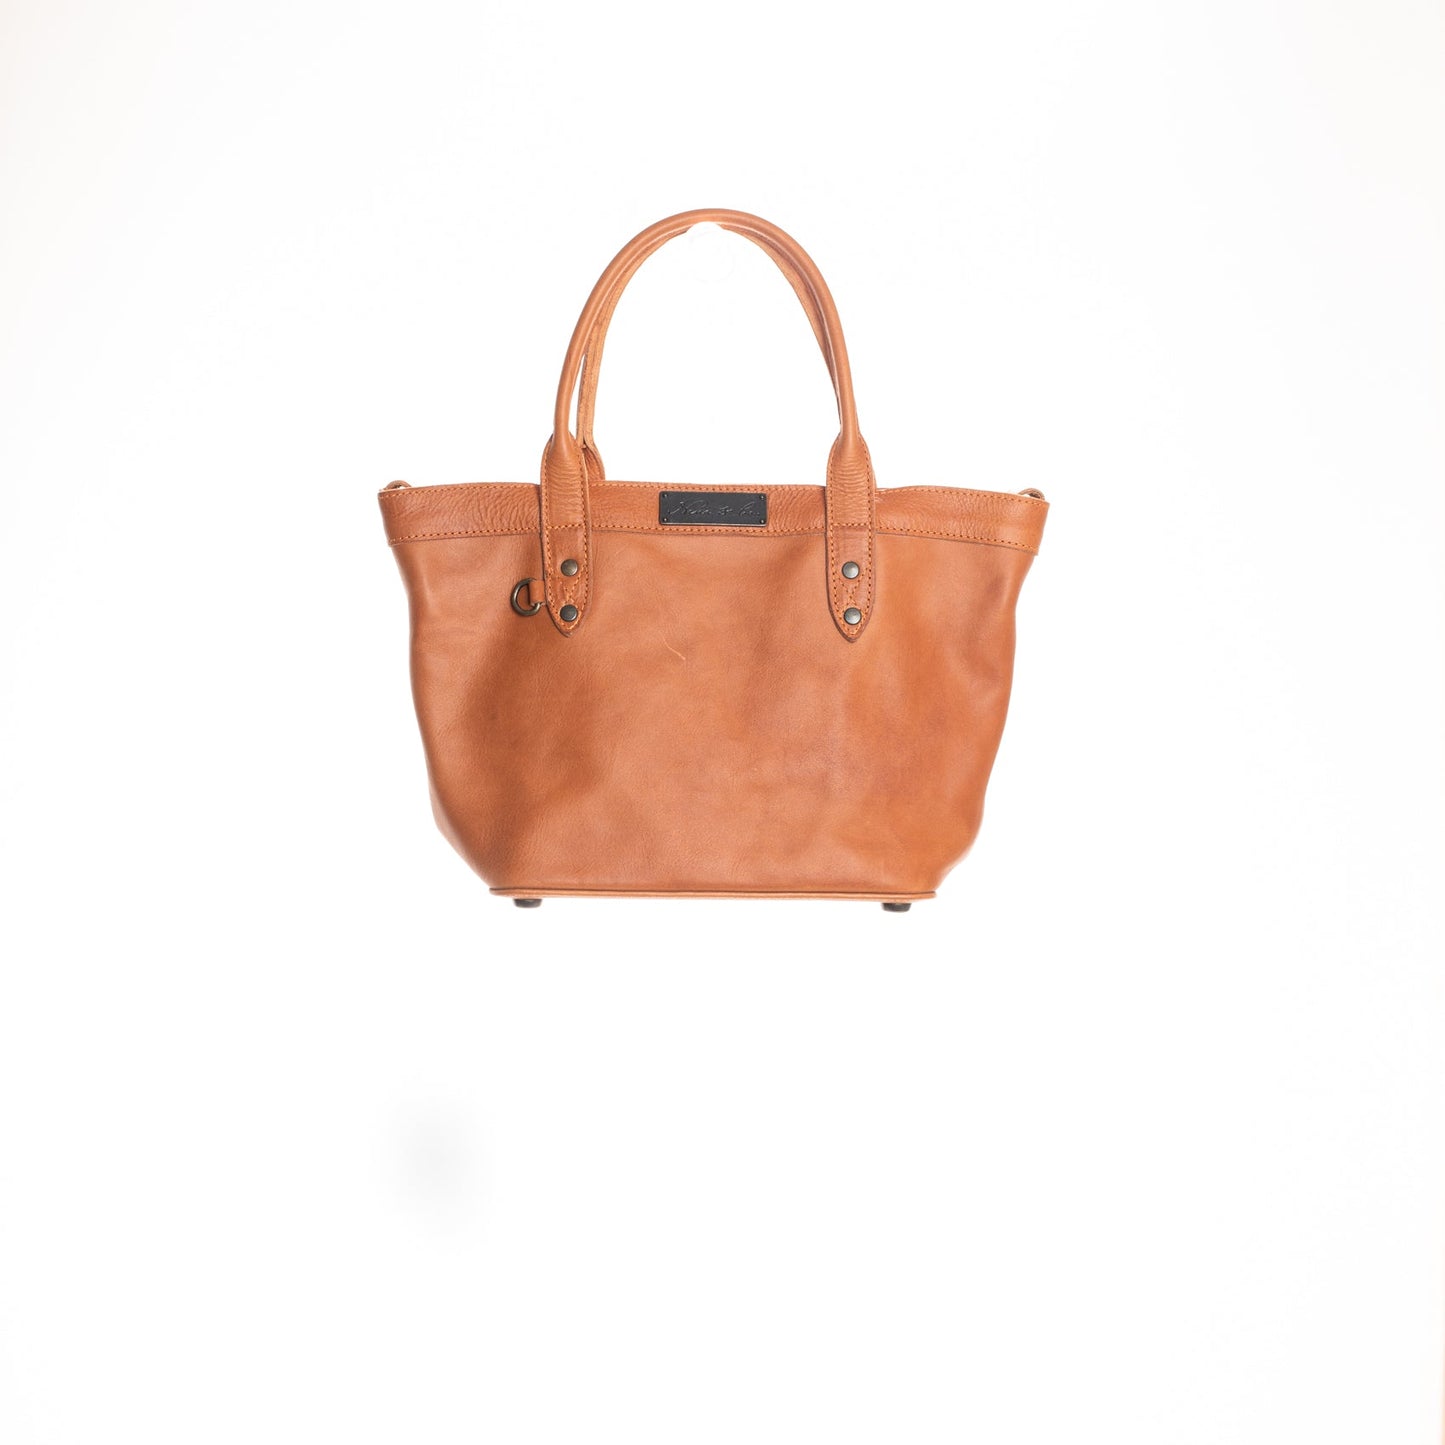 MINI CONVERTIBLE TOTE - MEXICO COLLECTION - FULL LEATHER - OCHRE LEATHER